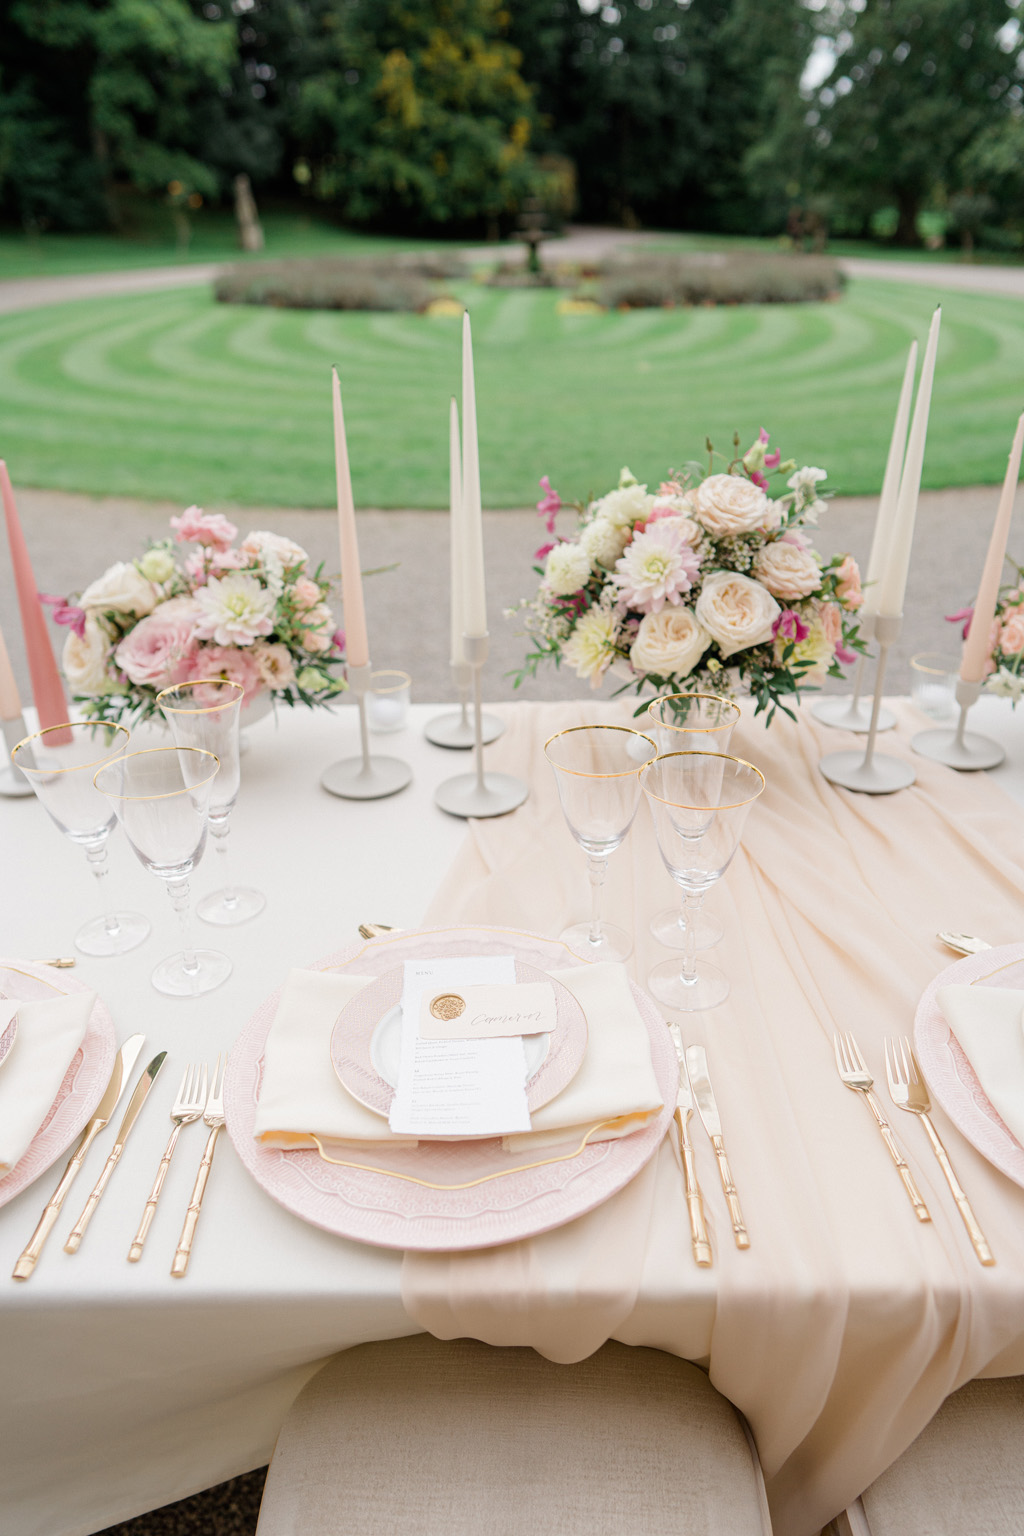 Clearwell Castle bride and groom photoshoot with white and pink floral inspiration